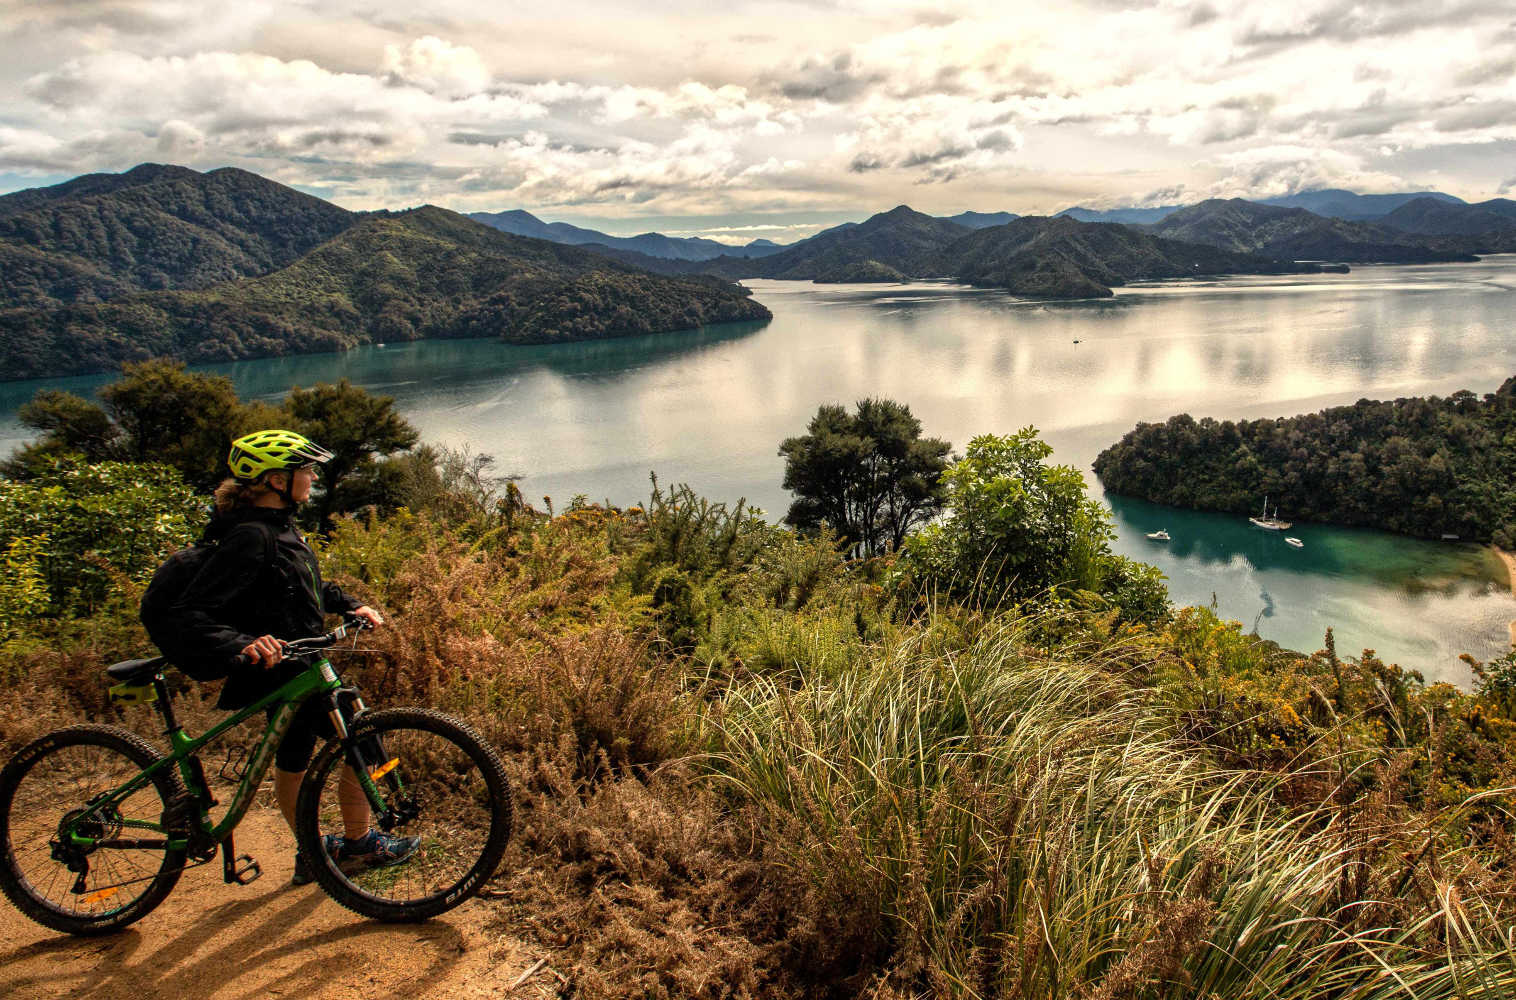 Cyclists on the Link Pathway, Marlborough Sounds, New Zealand